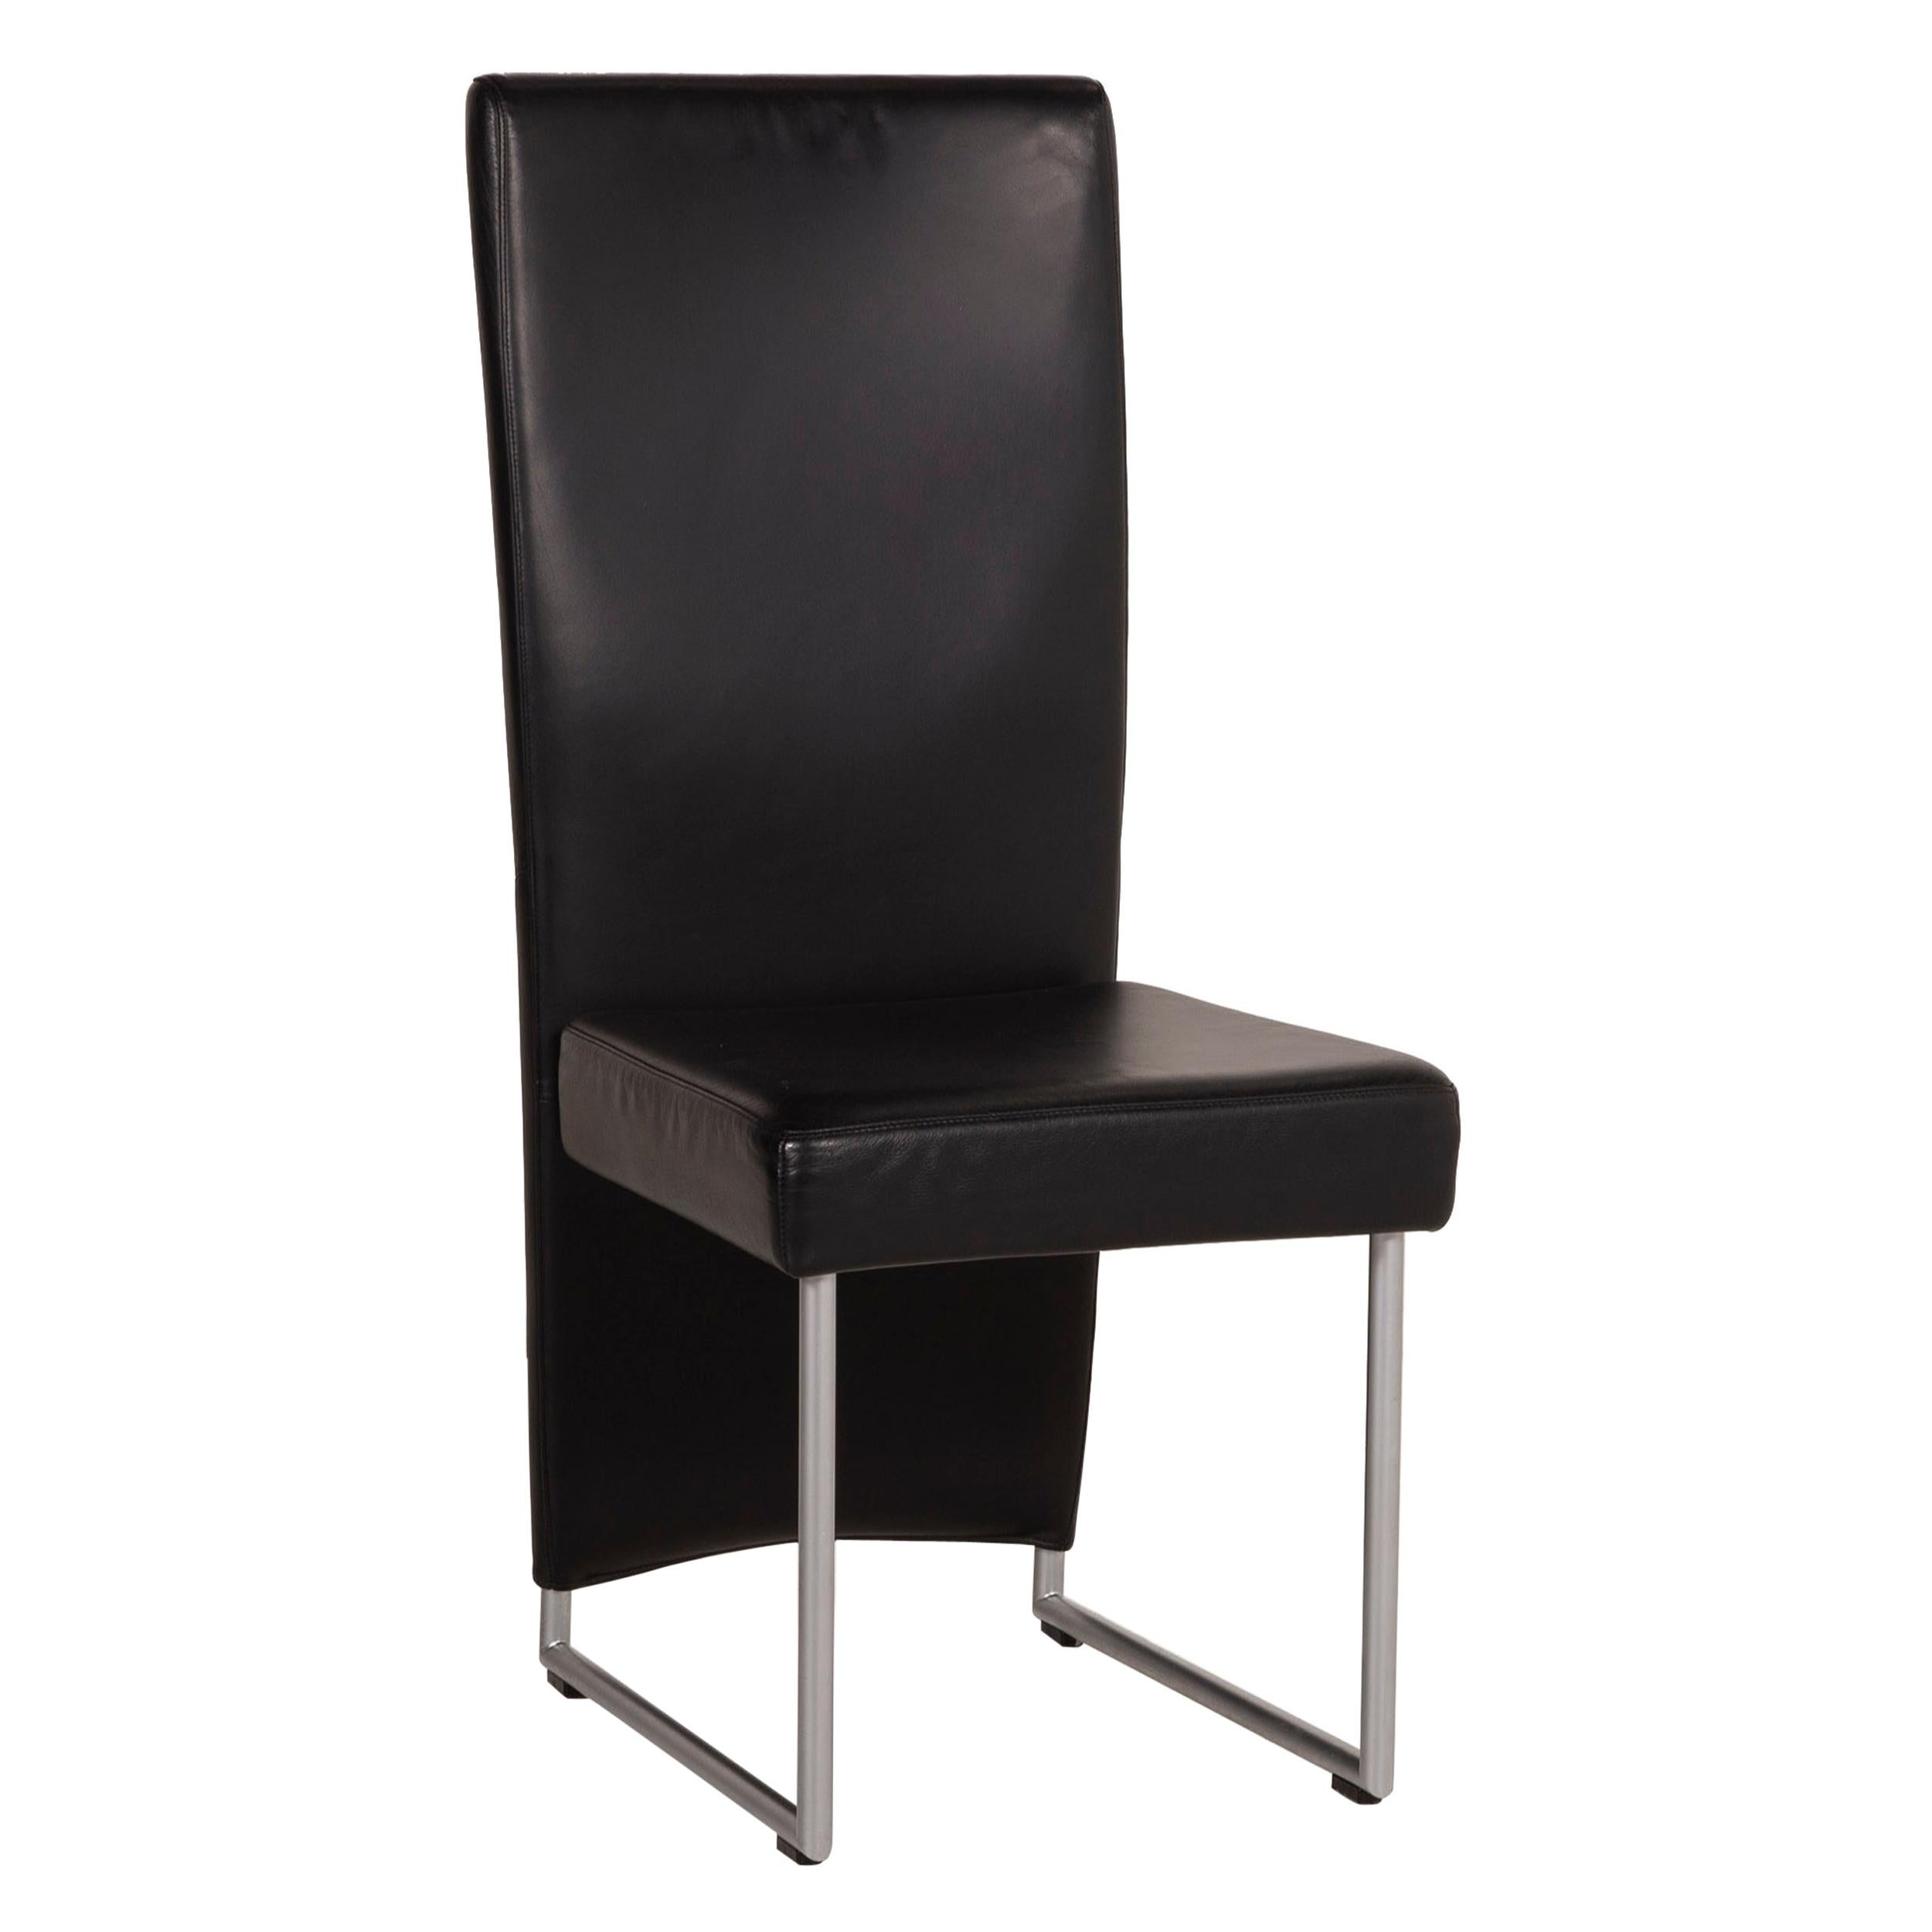 Rolf Benz Black Leather Chair For Sale